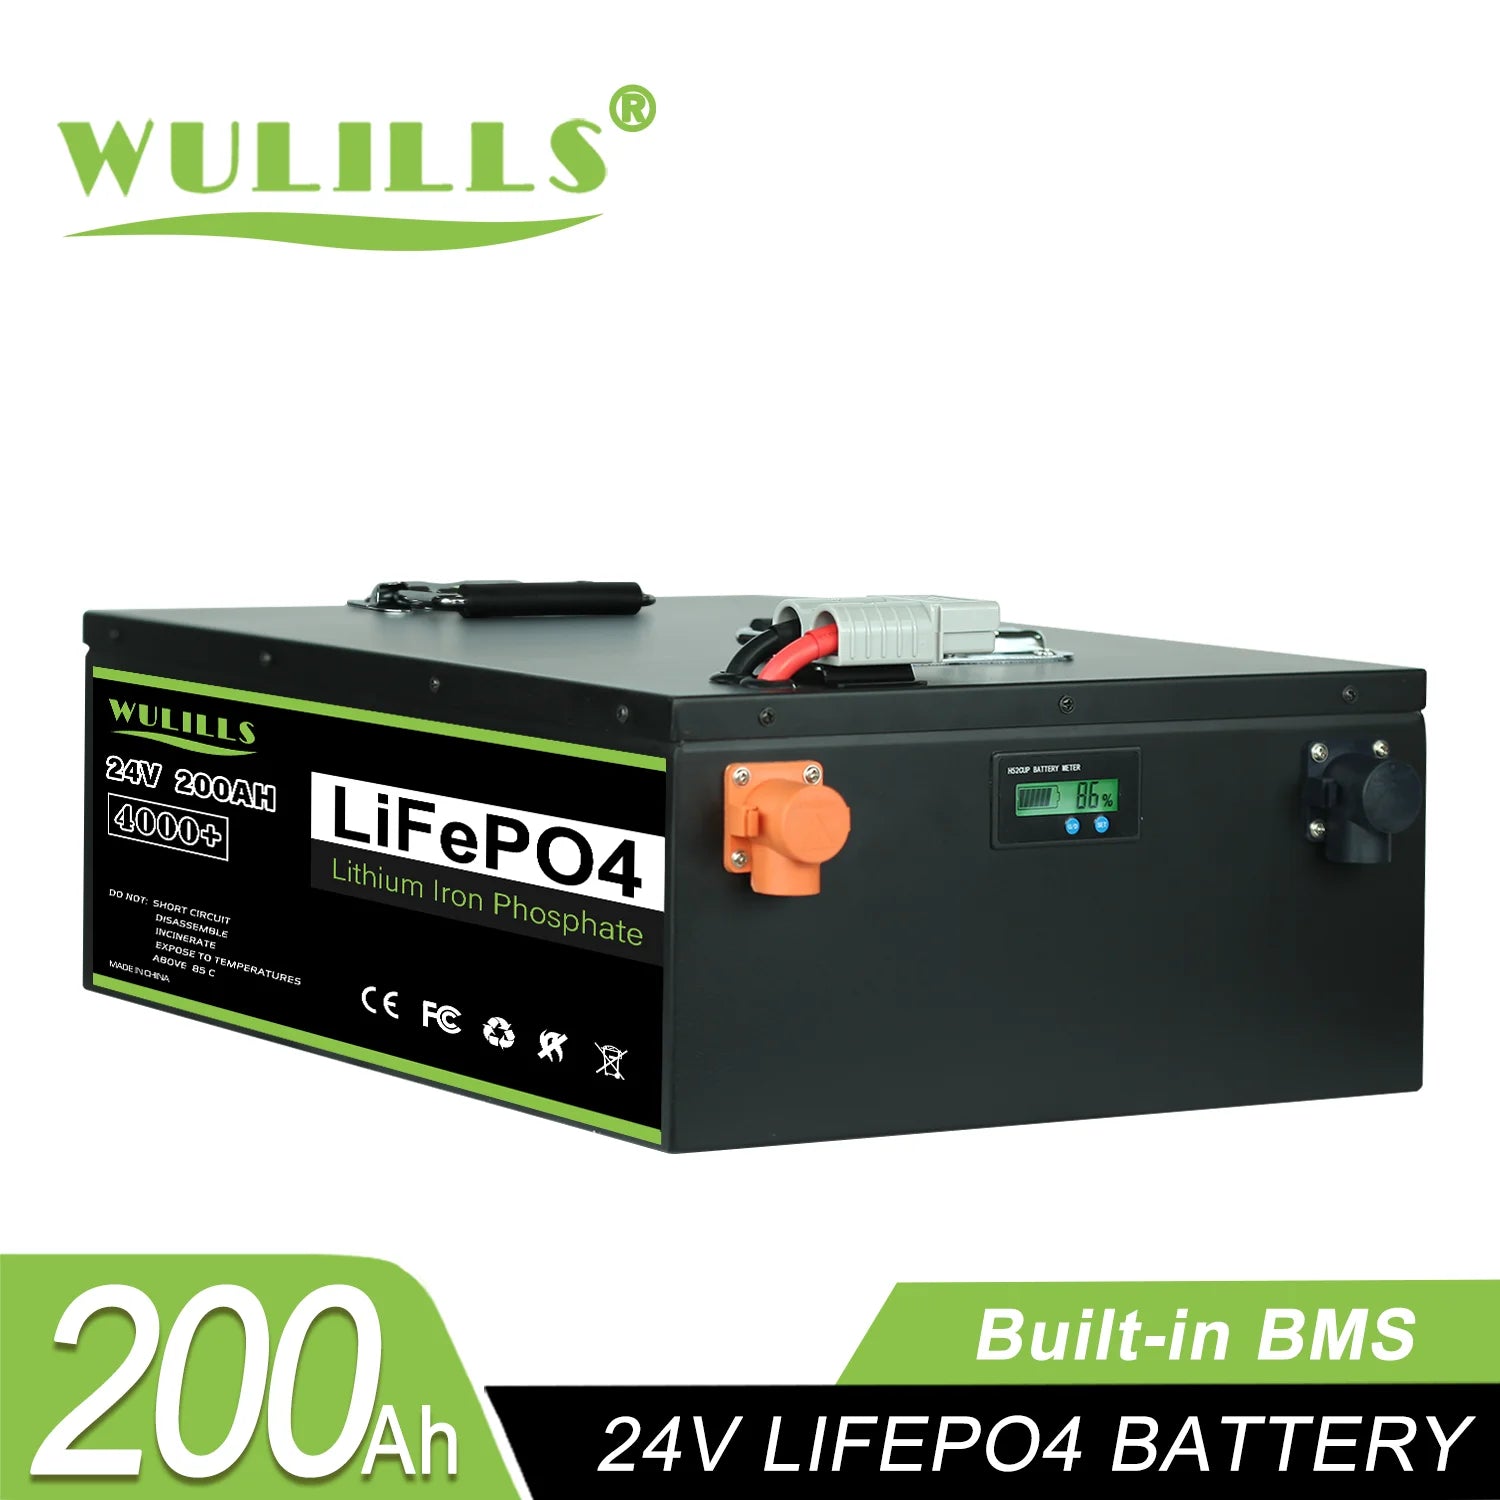 LiFePO4 battery pack with built-in BMS for safety; avoid overheating/short circuits/disassembly.